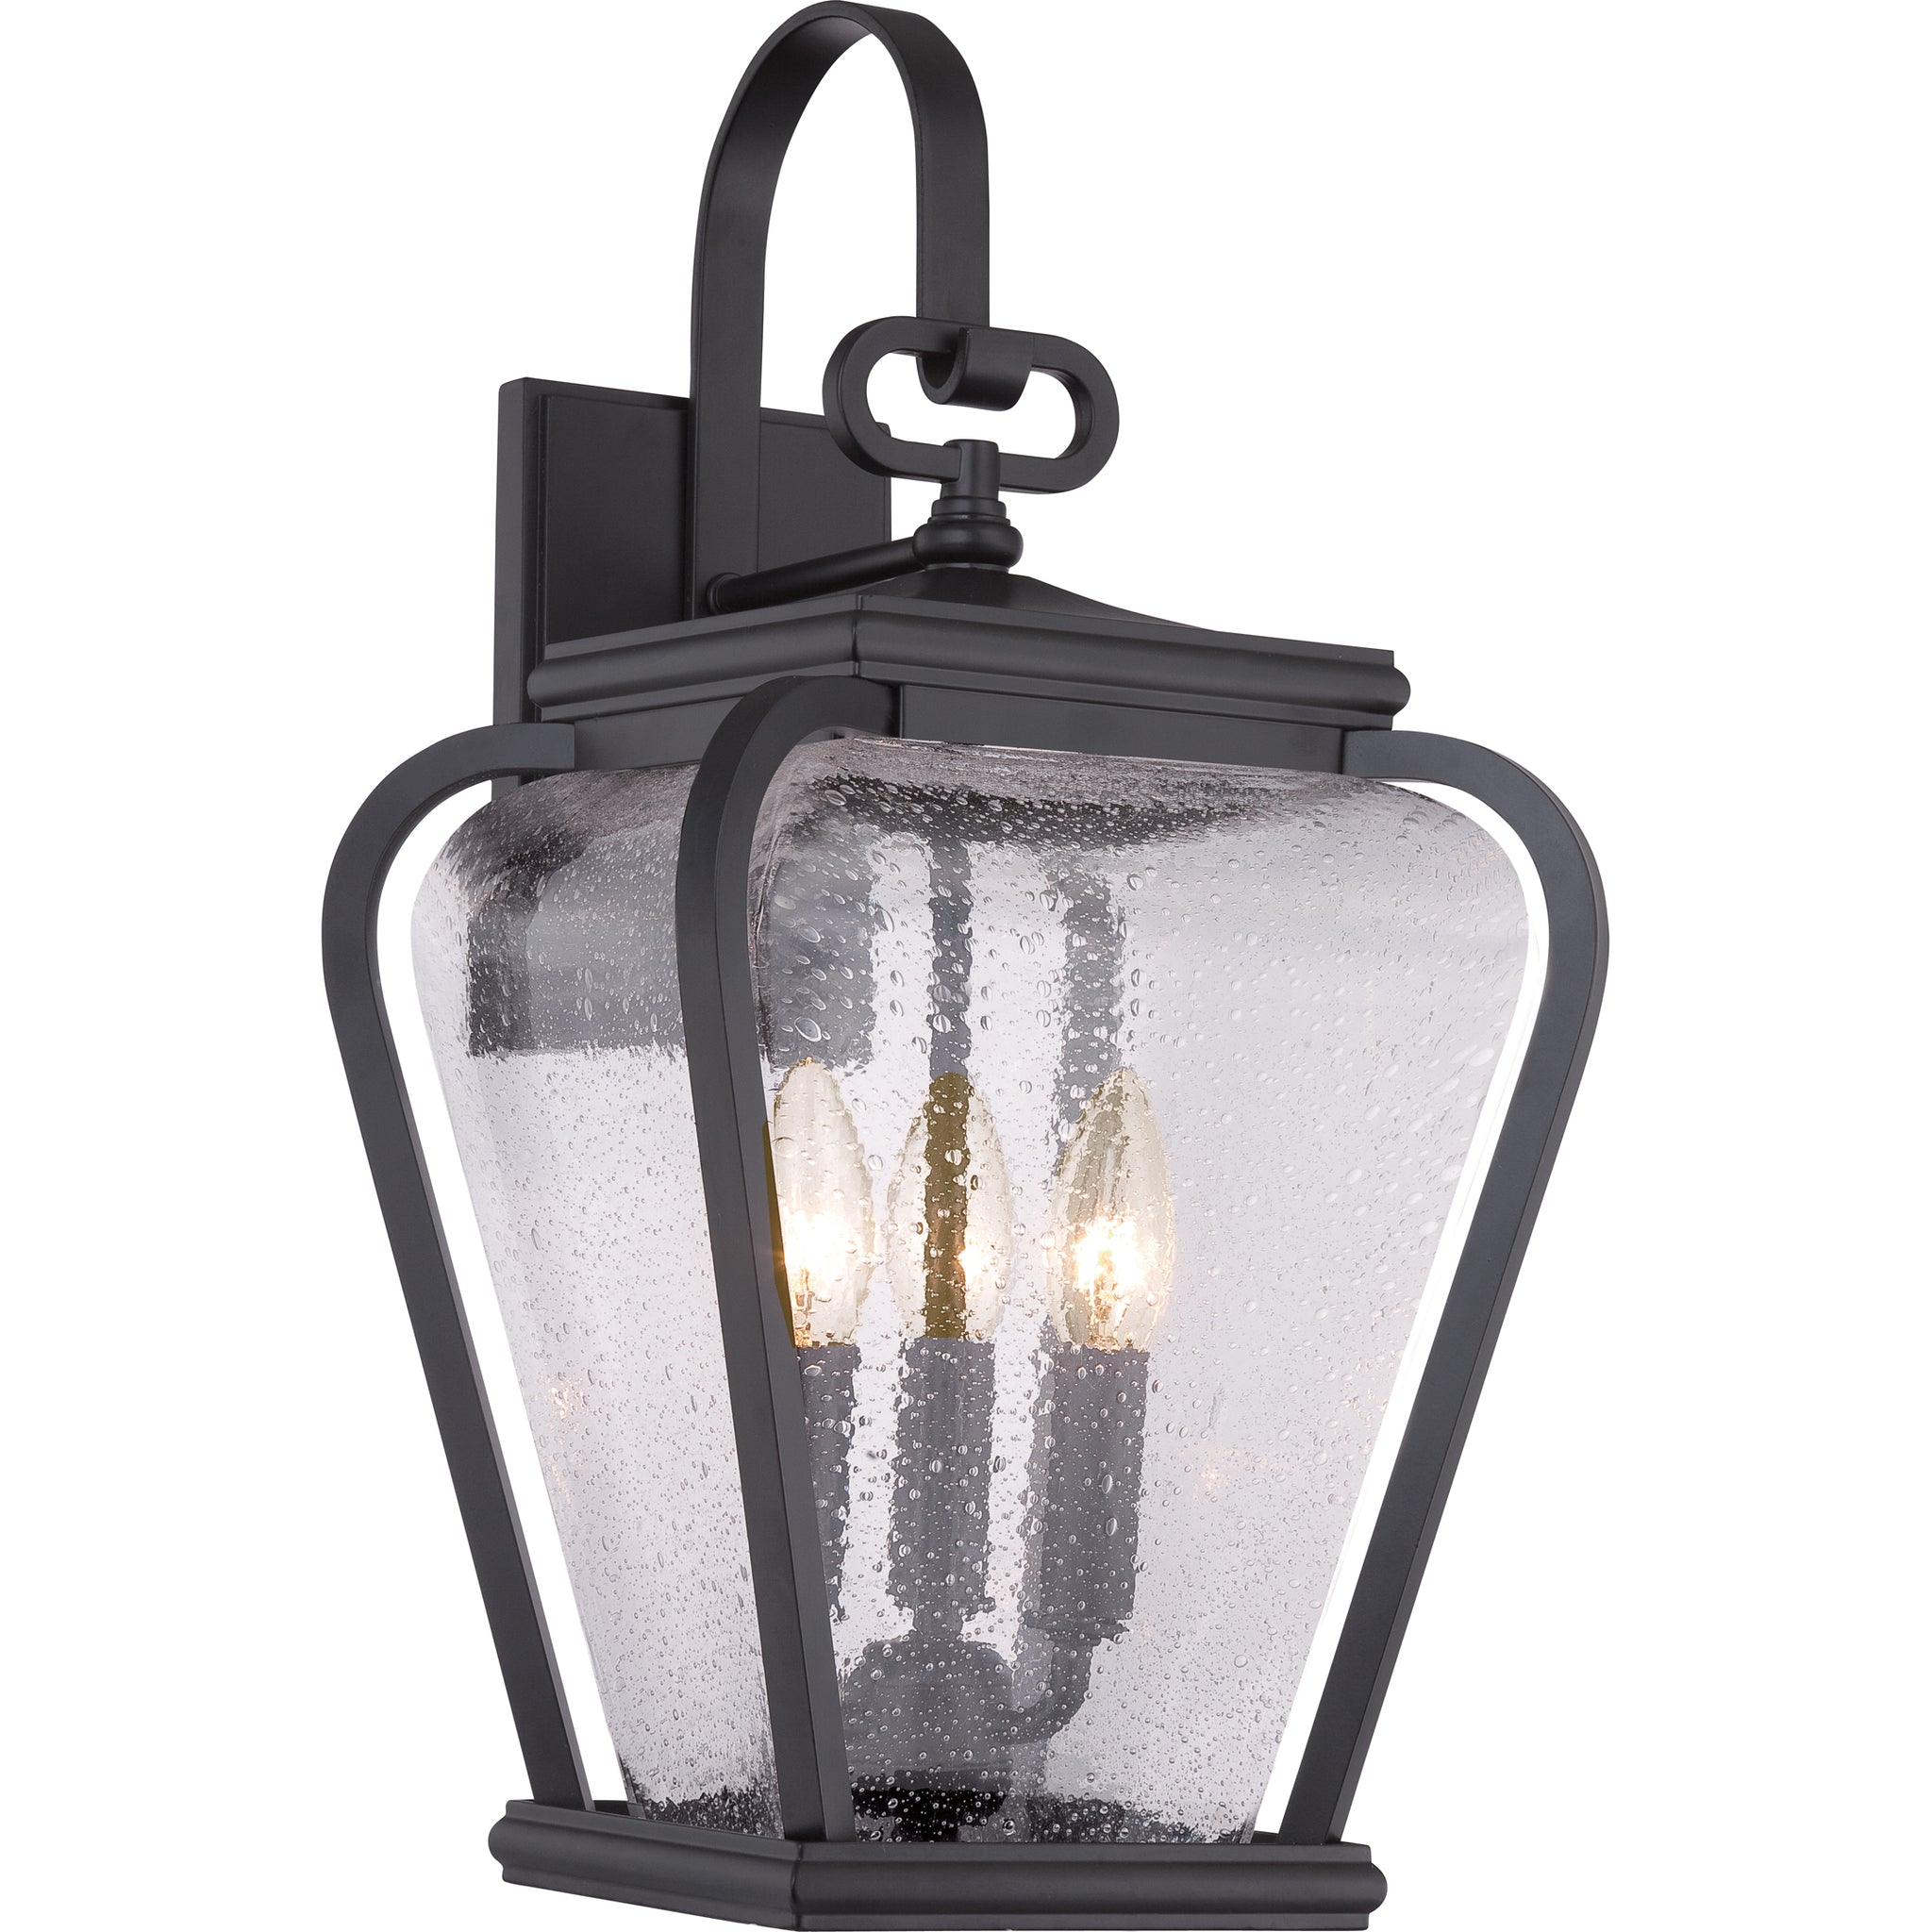 Province Outdoor Wall Light Mystic Black